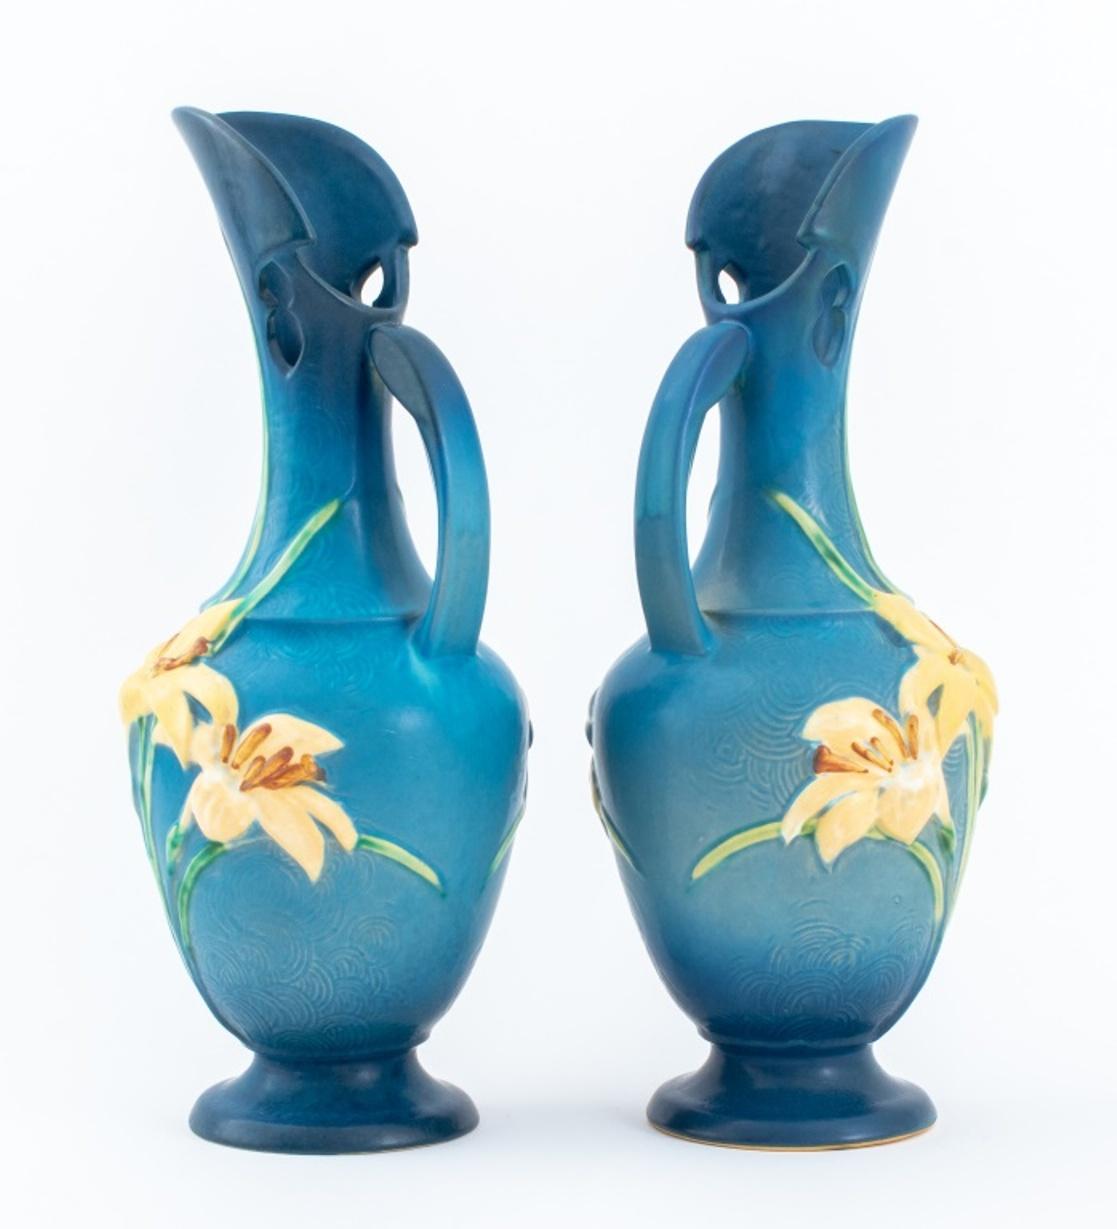 American Classical Roseville Blue Zephyr Lily Ceramic Ewers, Pair